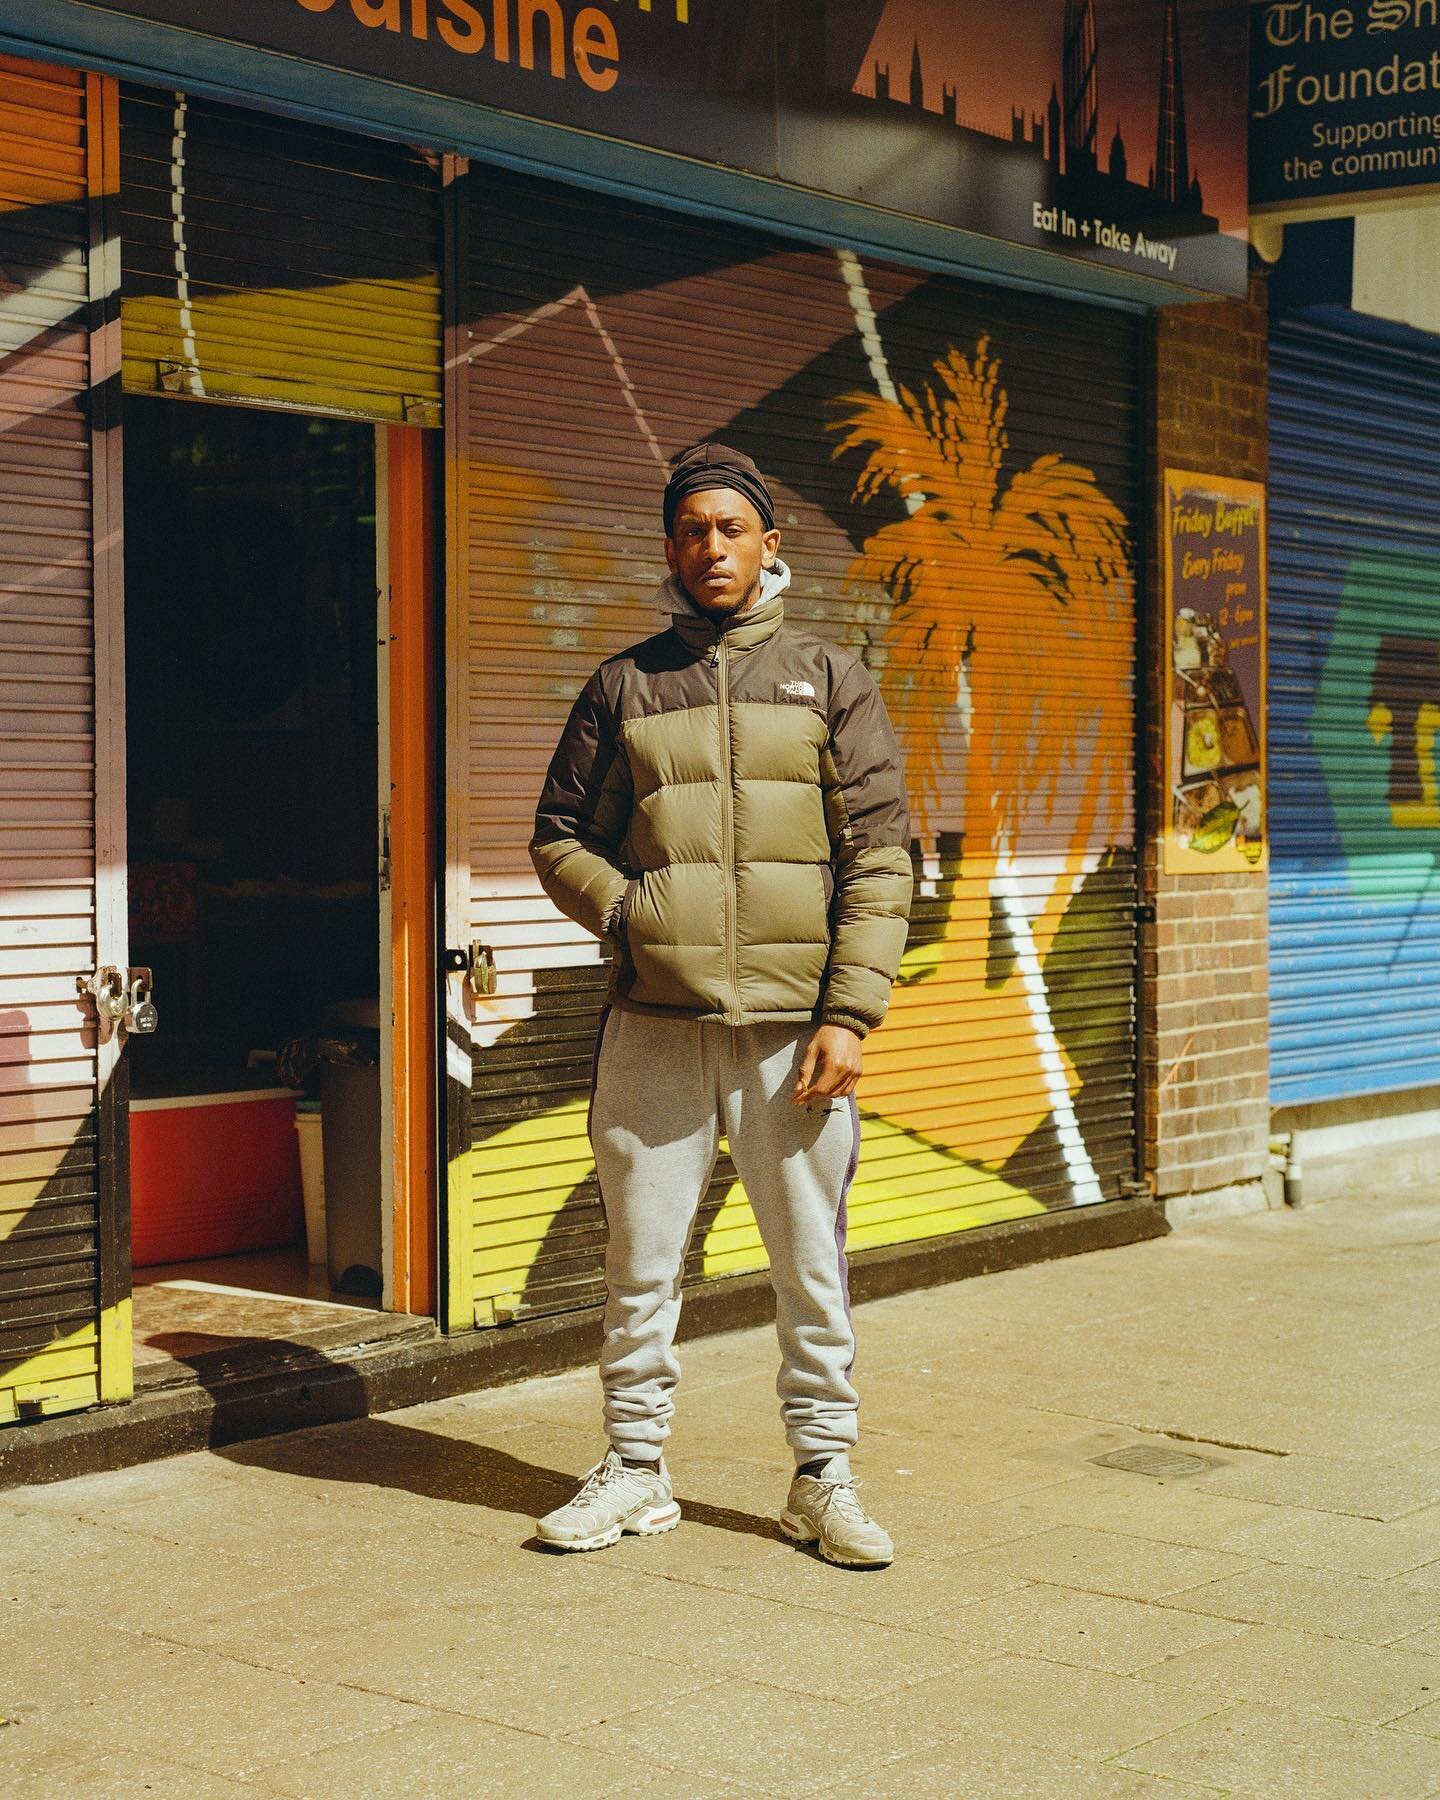 Jinnal, outside his family&rsquo;s Caribbean restaurant on Park Lane. On Saturdays the restaurant also operates as a foodbank for those in need in the local community.

April, 2023

#120film